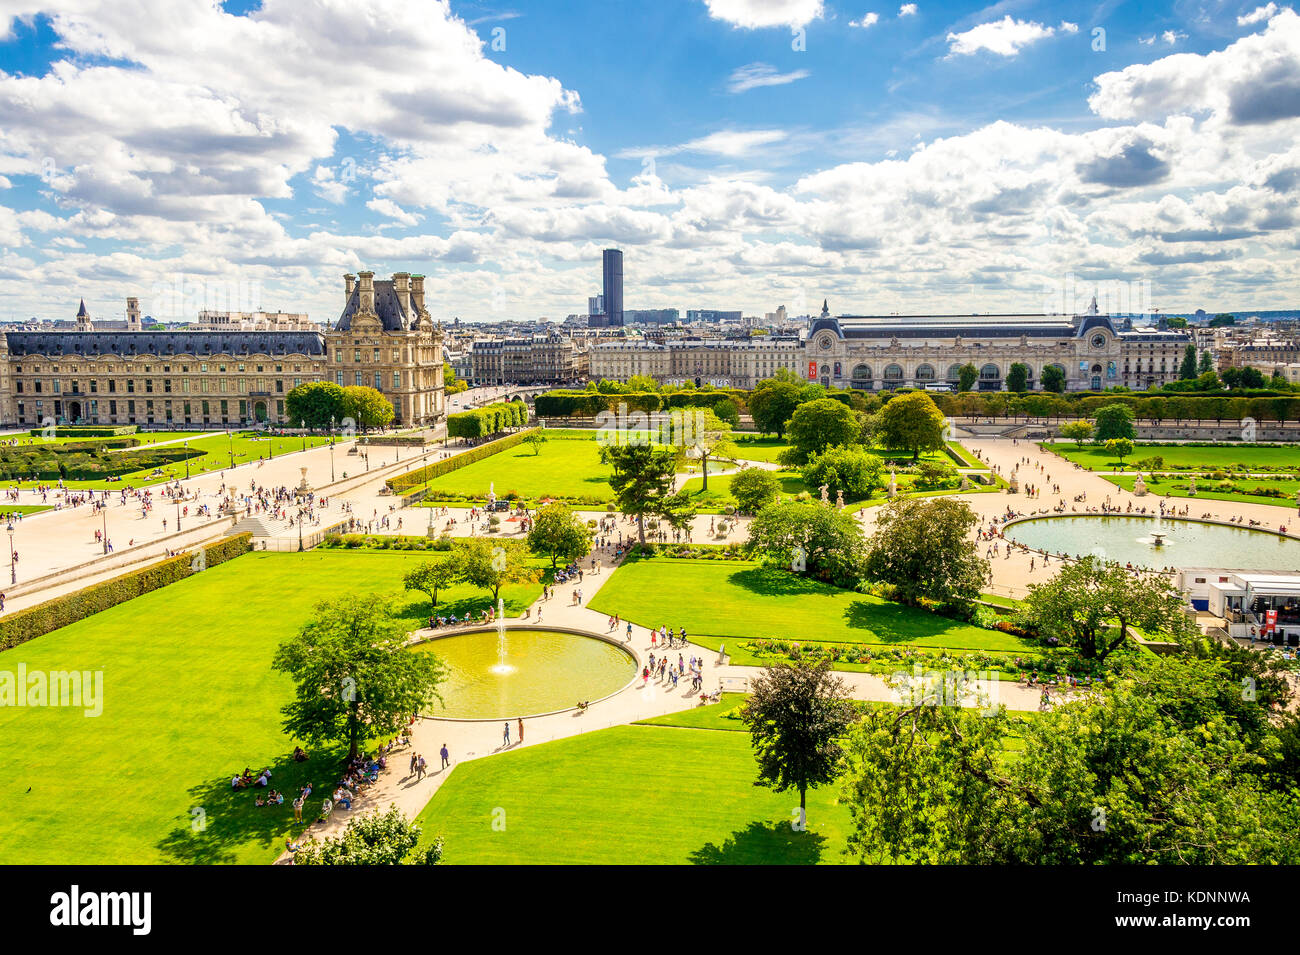 Aerial view of the Tuileries Garden in Paris, France Stock Photo